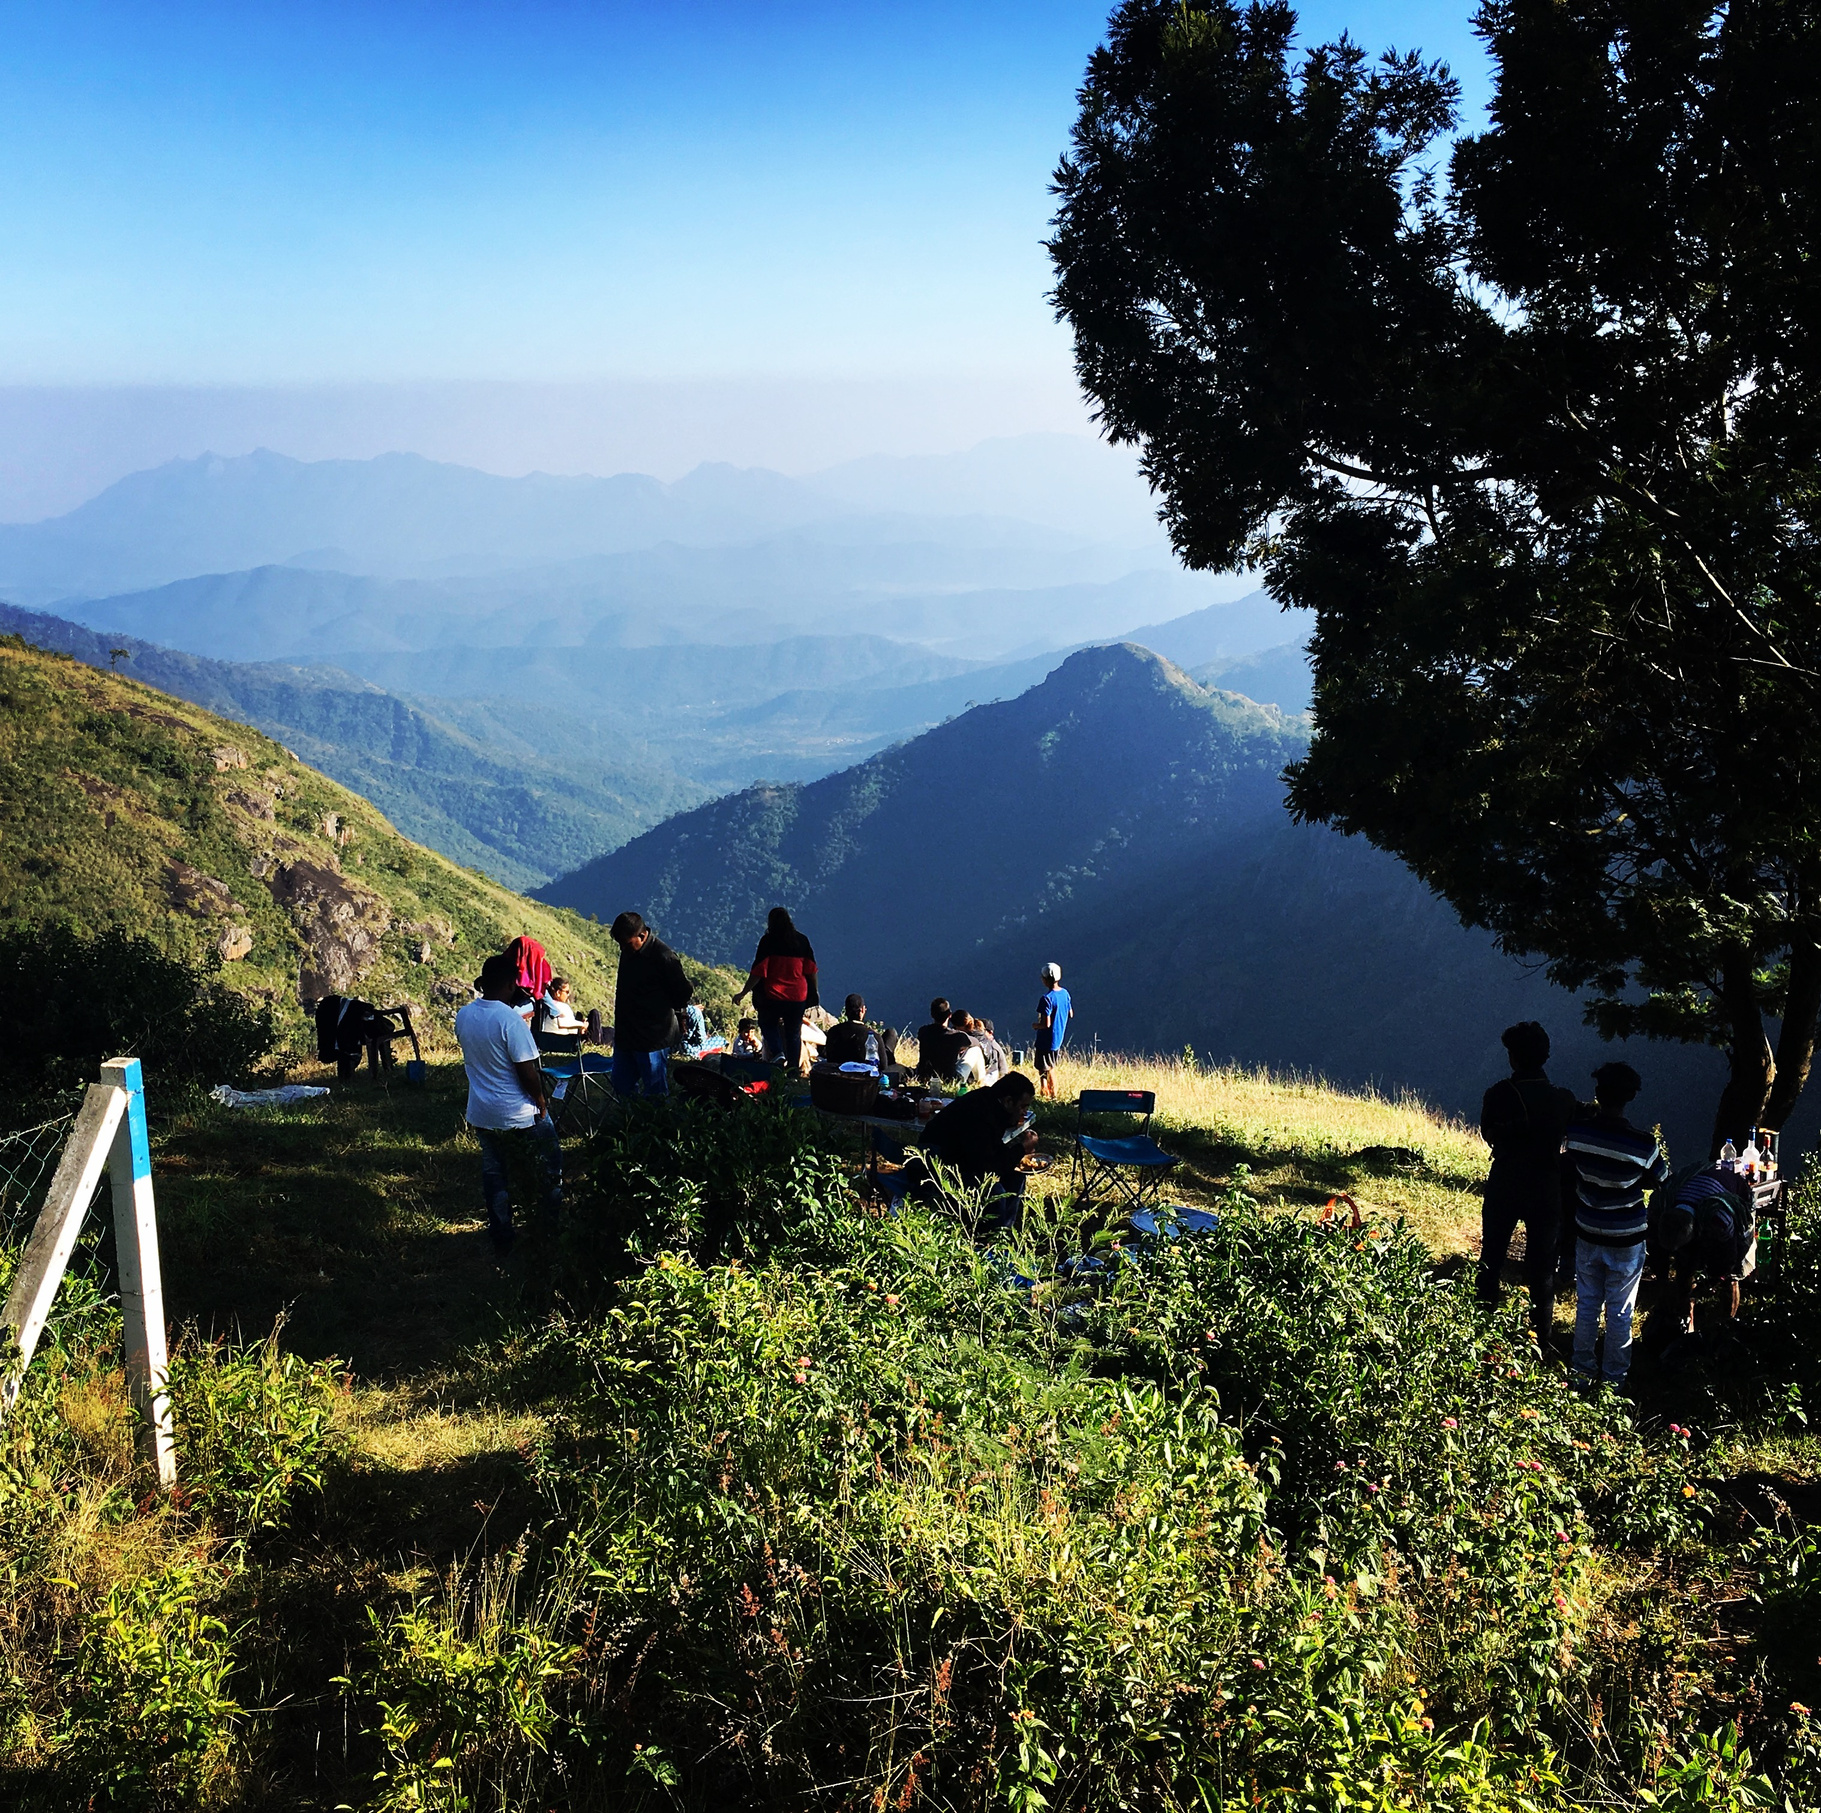 A group of guests enjoying a scenic view of the Nilgiris on location at Amara.